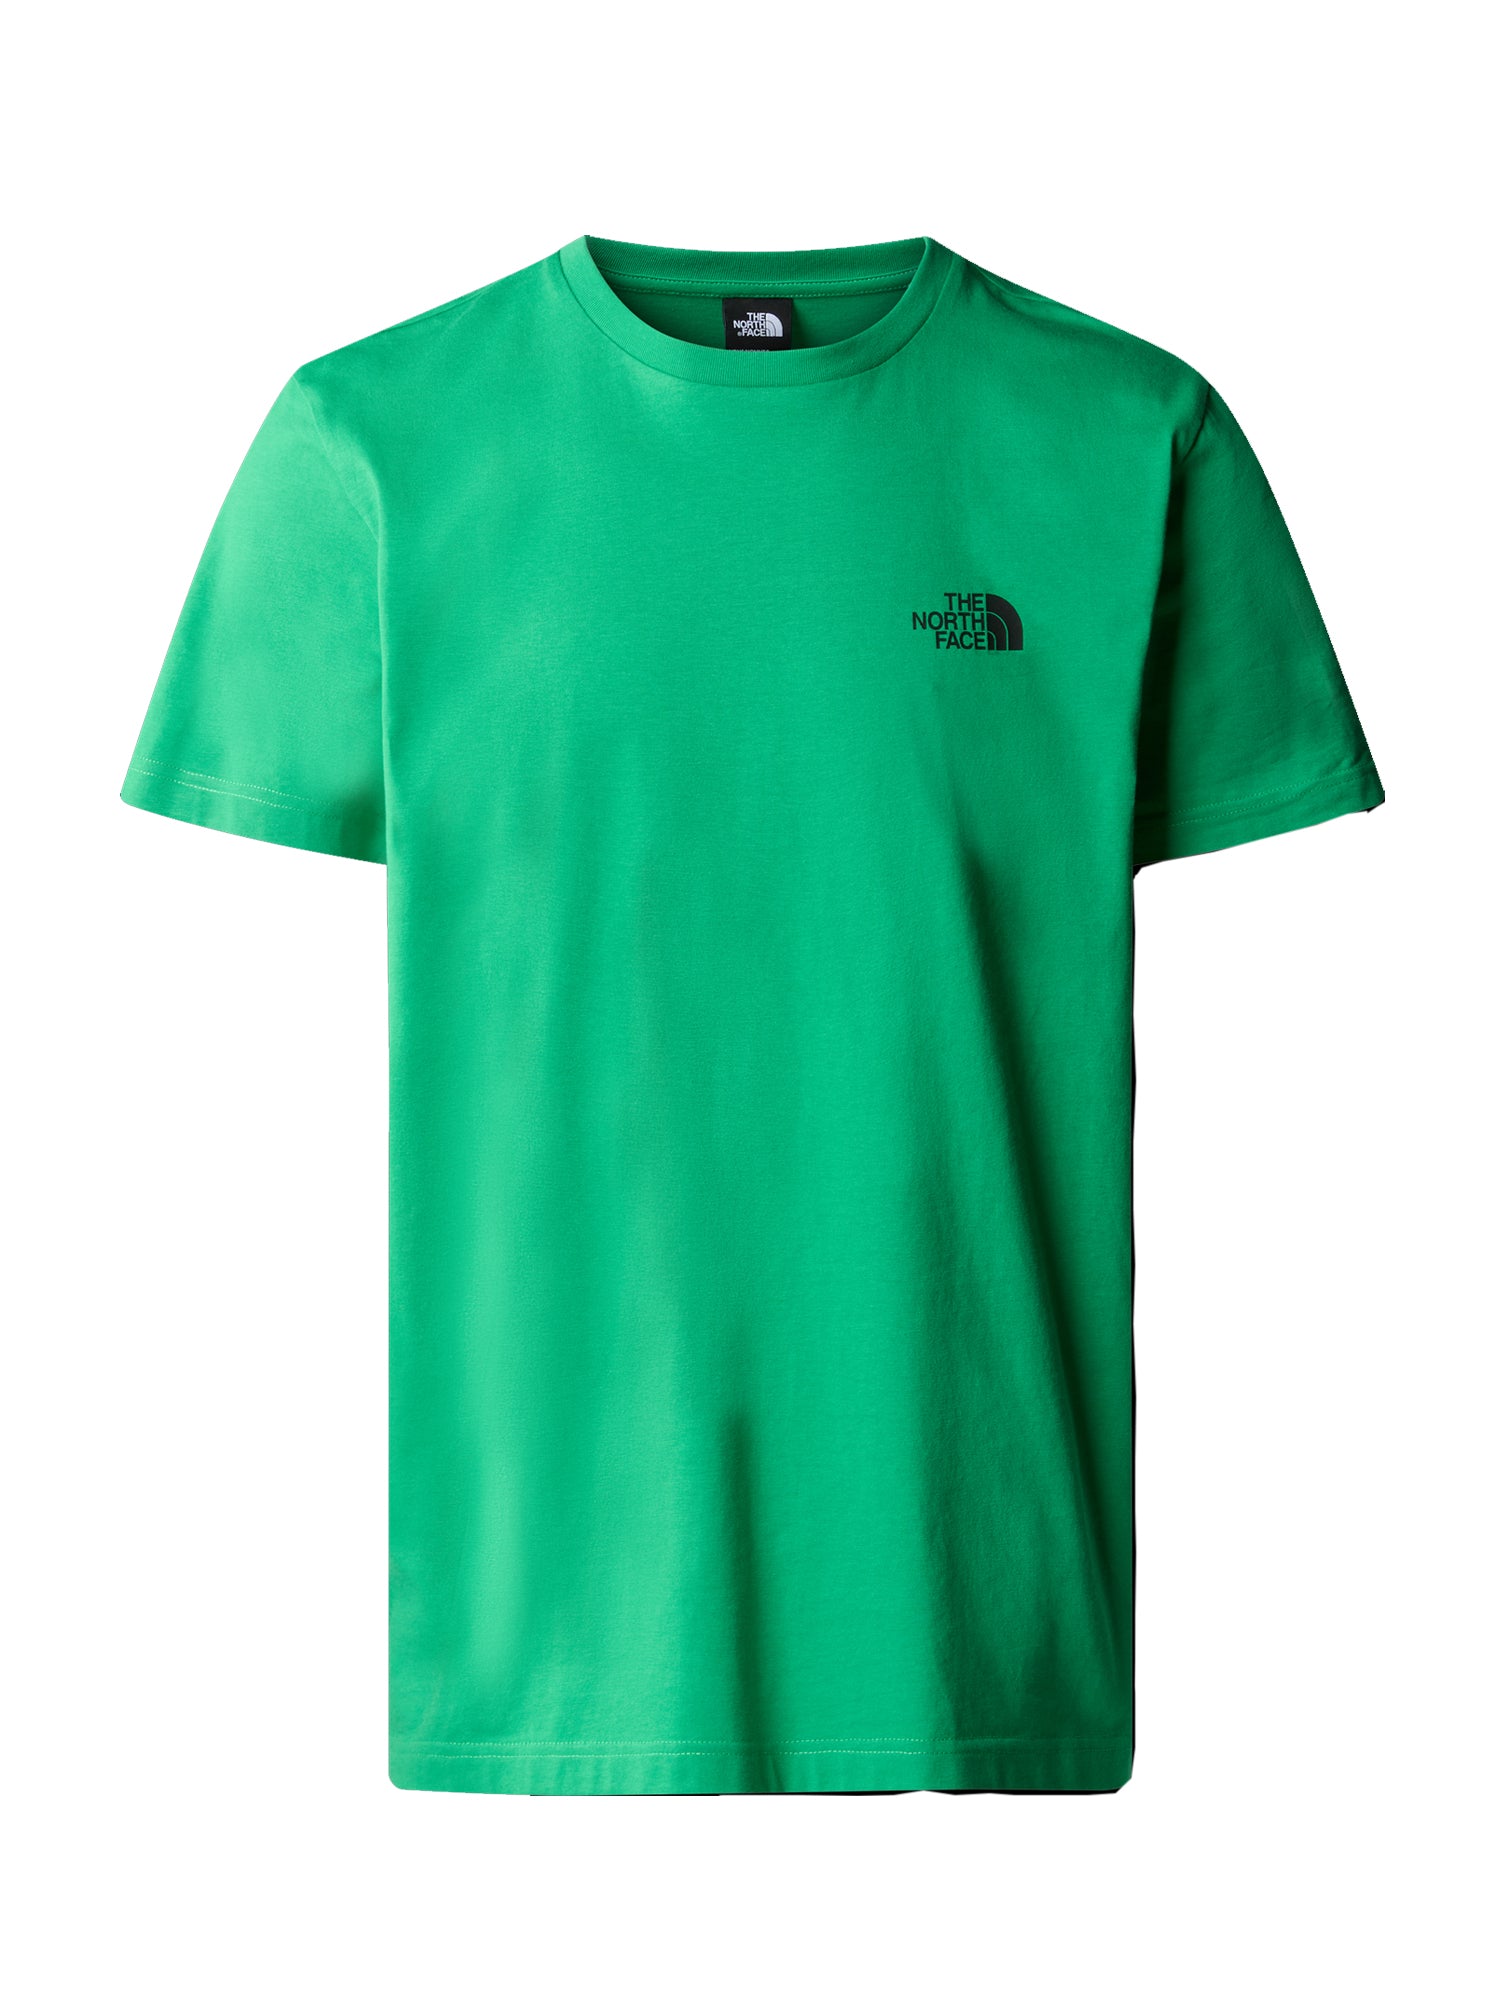 THE NORTH FACE T-SHIRT SIMPLE DOME VERDE